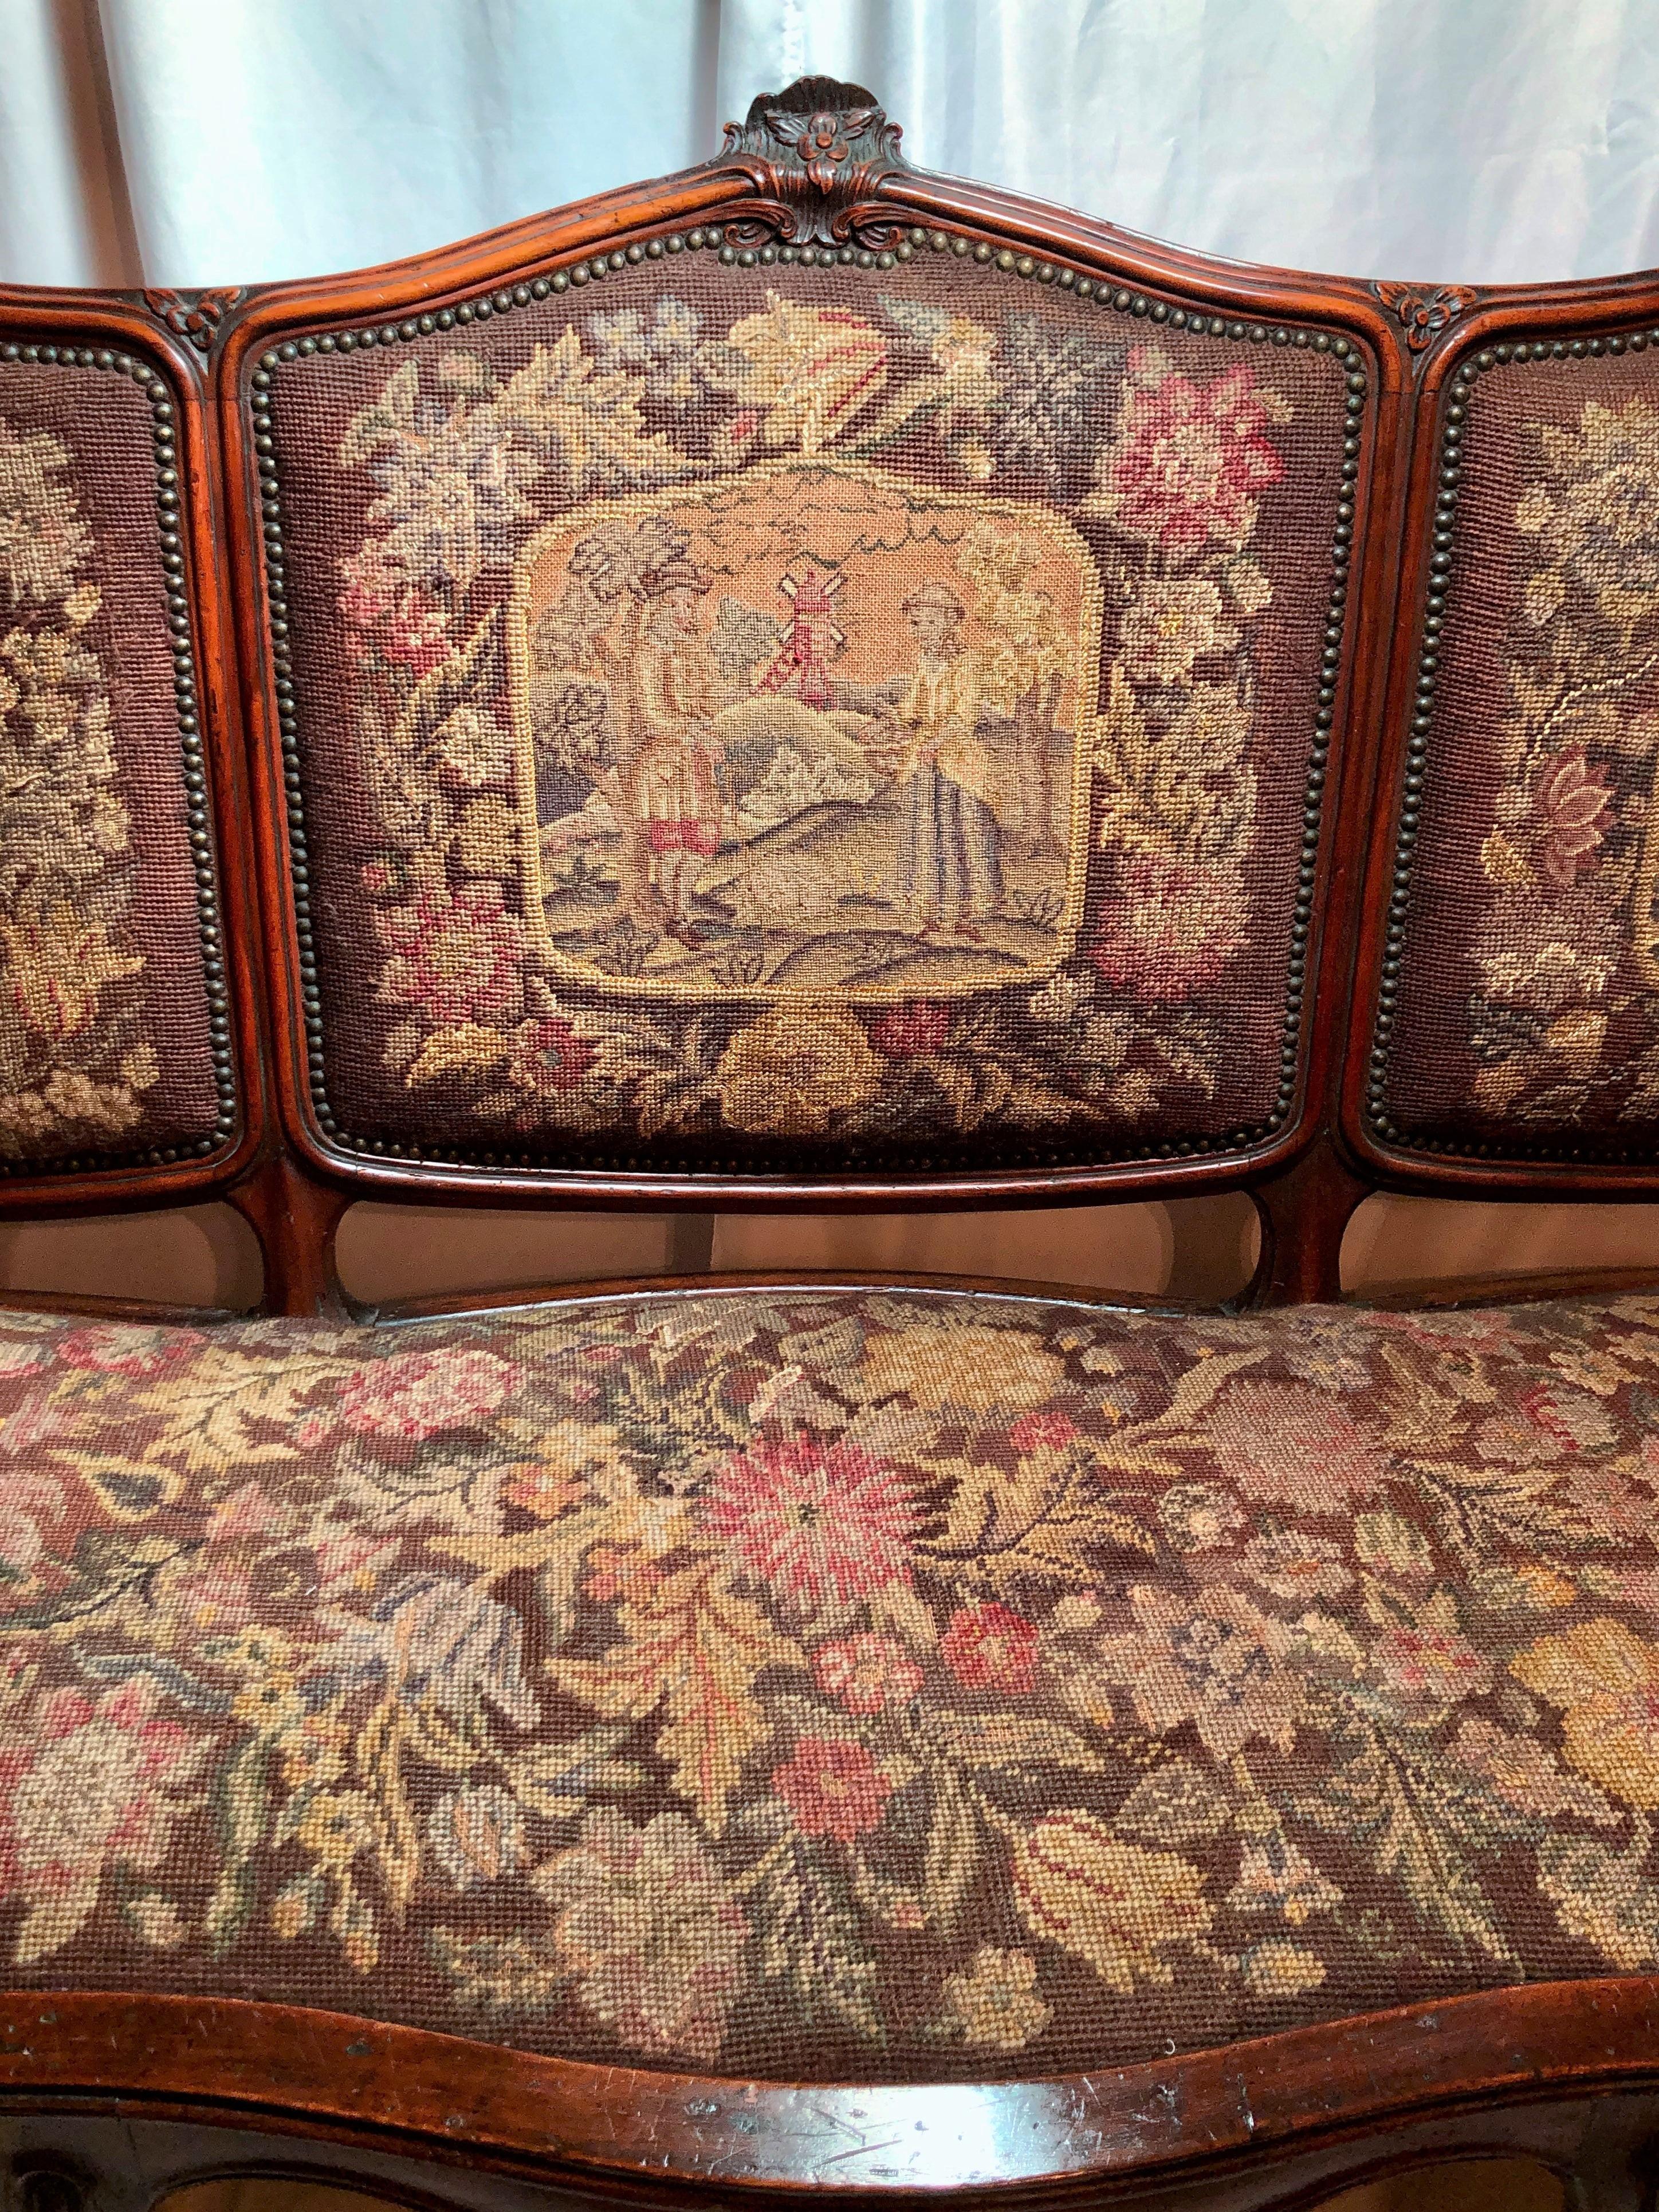 Antique late 19th century French walnut settee with original needlepoint and petit point.